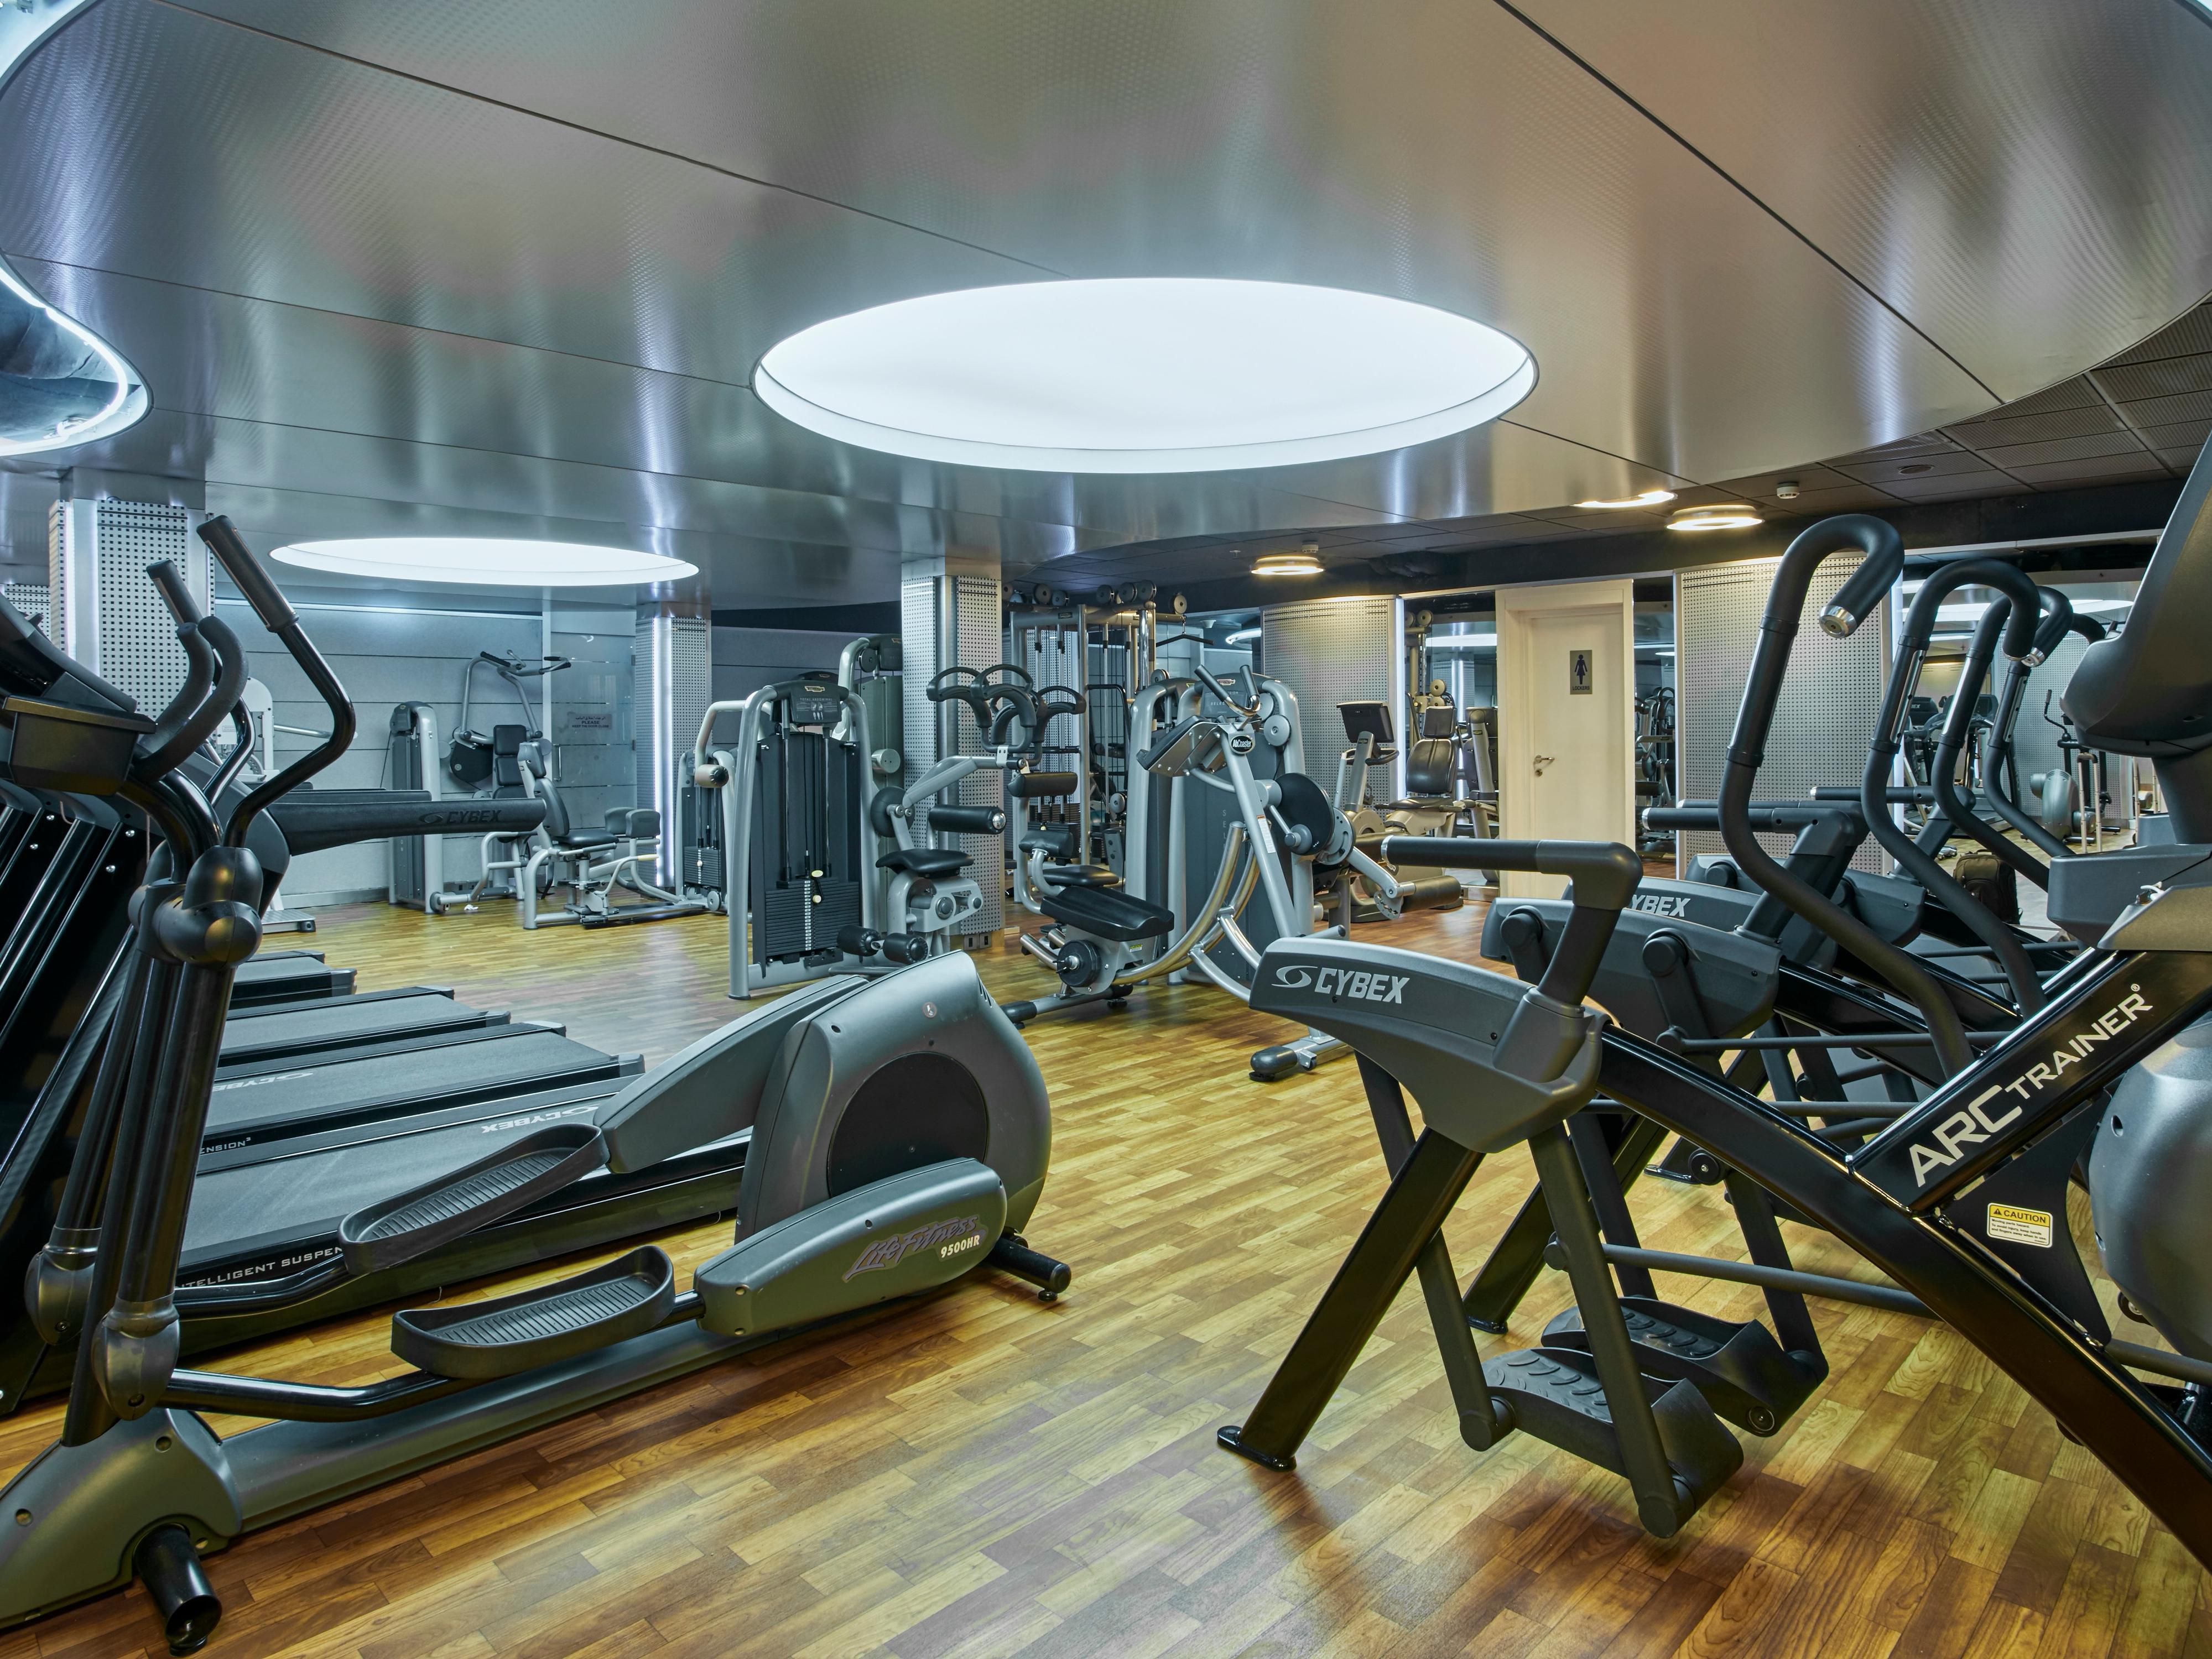 Edge 24-hour fitness offers great sports amenities including squash, an open-air pool, and a fully equipped gym.